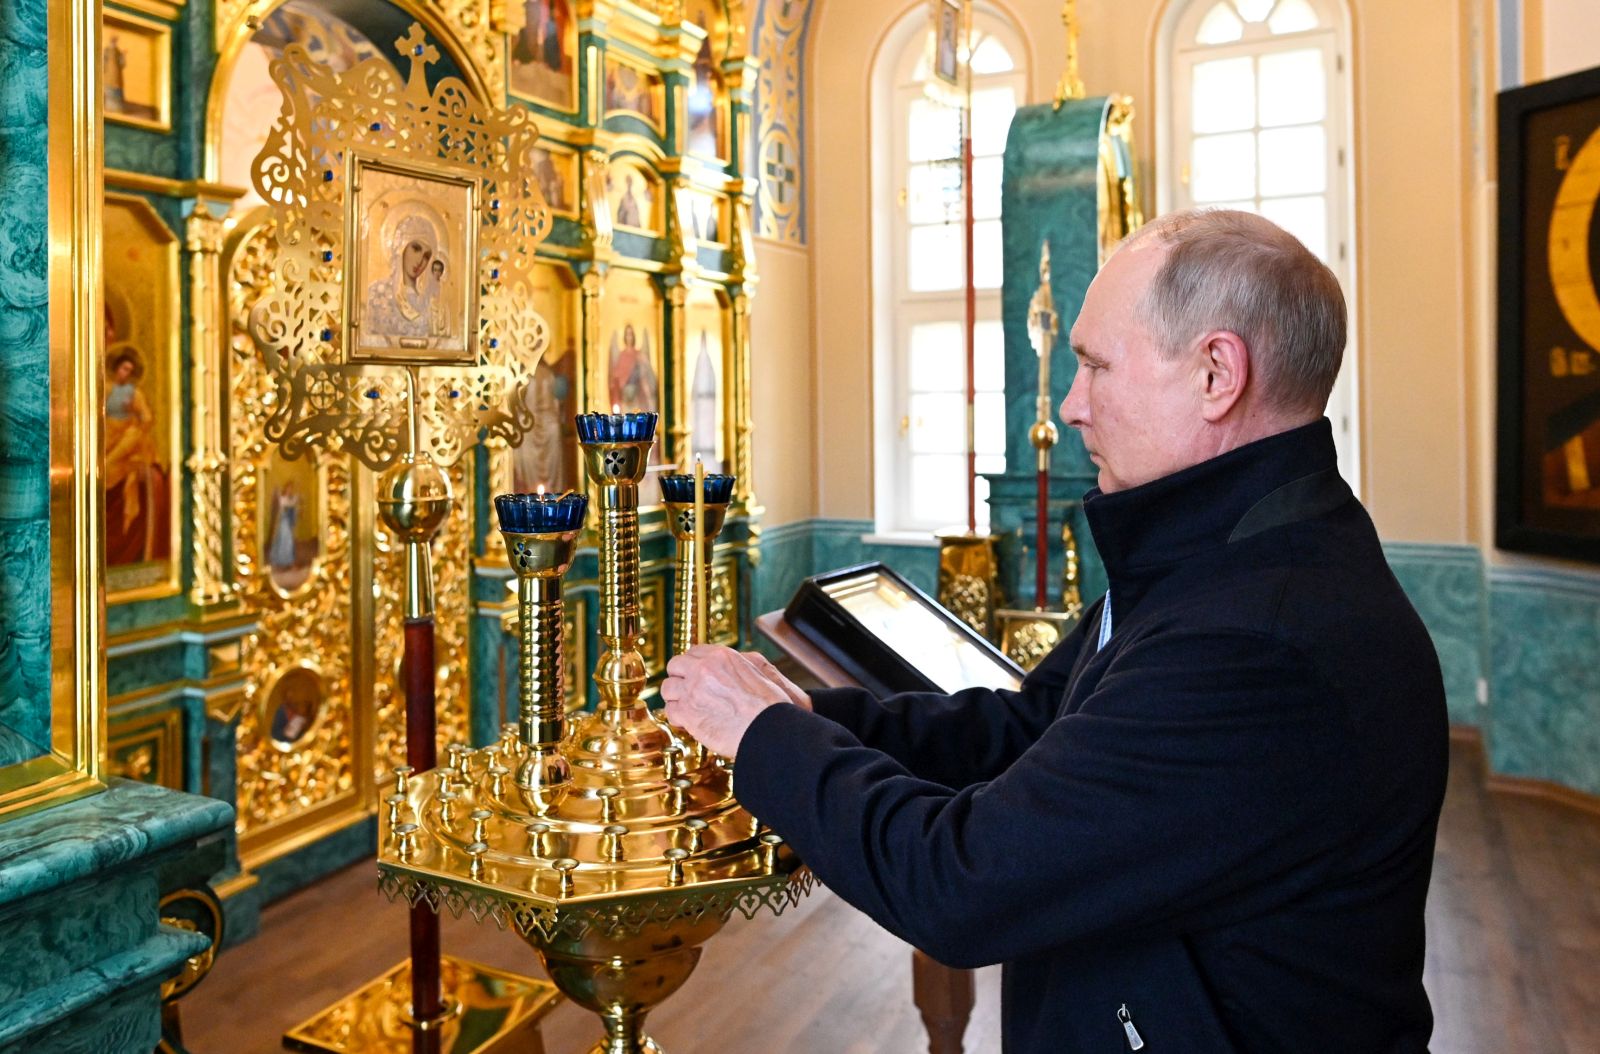 epa09385501 Russian President Vladimir Putin lights a candle visiting the Konevsky Monastery on Konevets Island on Ladoga Lake in Leningrad region, 31 July 2021 (Issued 01 August 2021). The monastery, built at the beginning of the 19th century, was later practically destroyed. In 2016, Vladimir Putin visited Konevets and gave instructions to restore the main temple and skete of the Konevskaya Icon of the Mother of God. To date, the monastery has been restored by the forces and means of Russian oil company 'Rosneft'.  EPA/ALEXEI NIKOLSKY/SPUTNIK/KREMLIN POOL / POOL